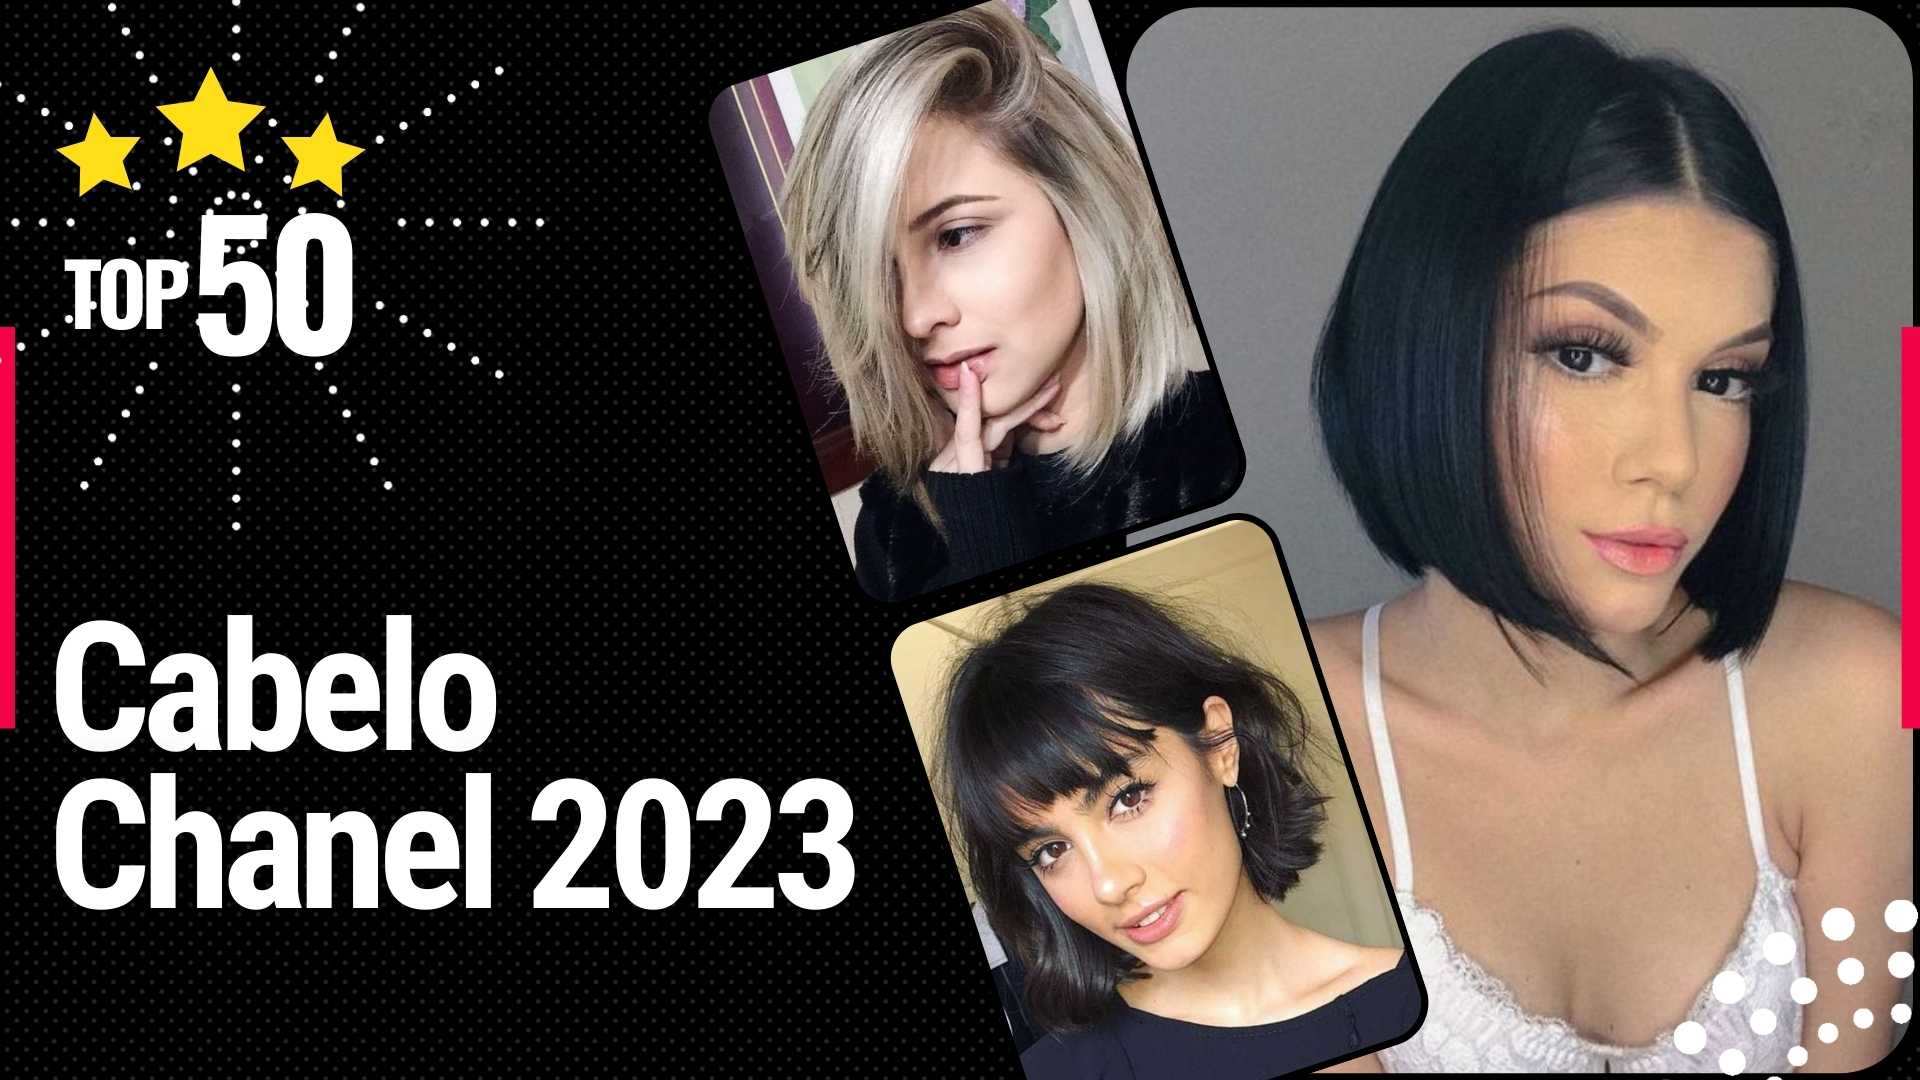 Chanel Haircut 2023 - See more than 80 Chanel Hair inspirations and trends